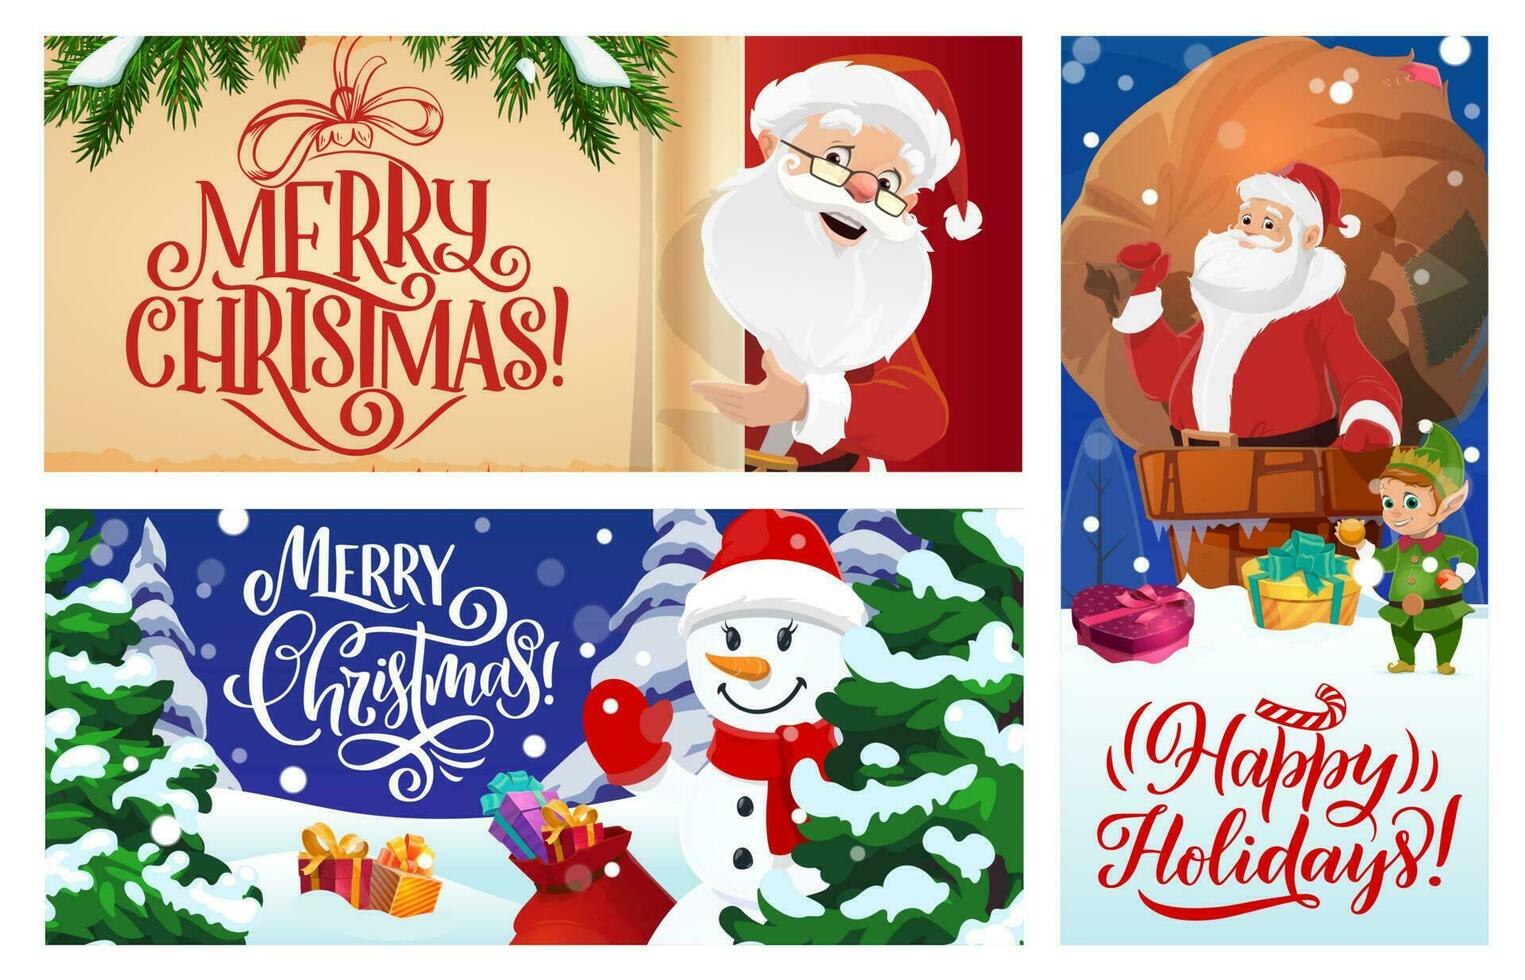 Merry Christmas greeting cards or vector posters